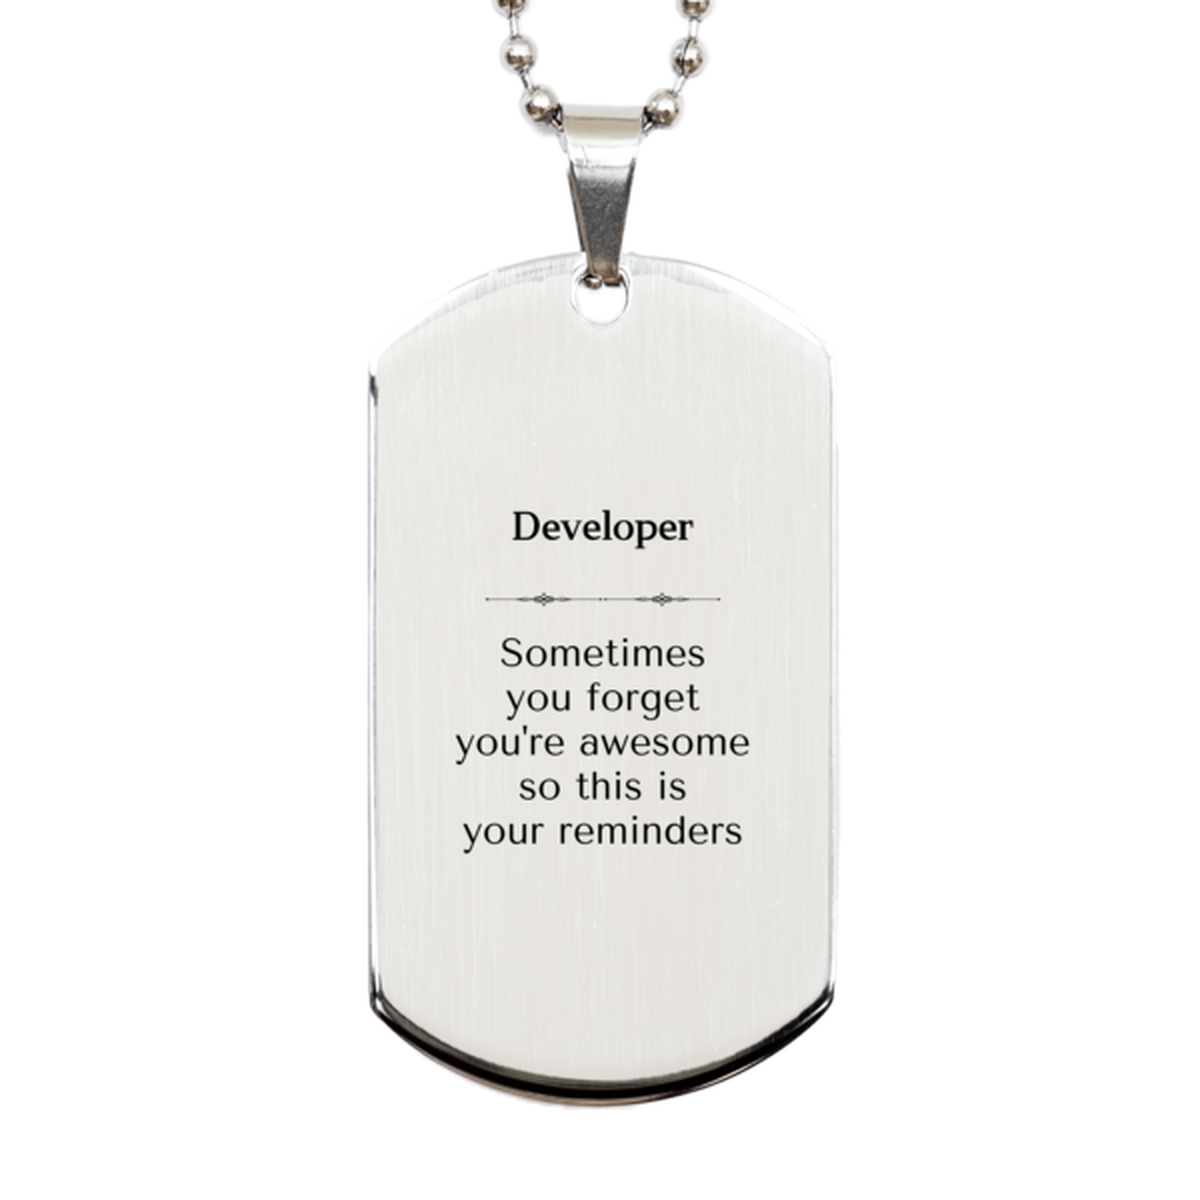 Sentimental Developer Silver Dog Tag, Developer Sometimes you forget you're awesome so this is your reminders, Graduation Christmas Birthday Gifts for Developer, Men, Women, Coworkers